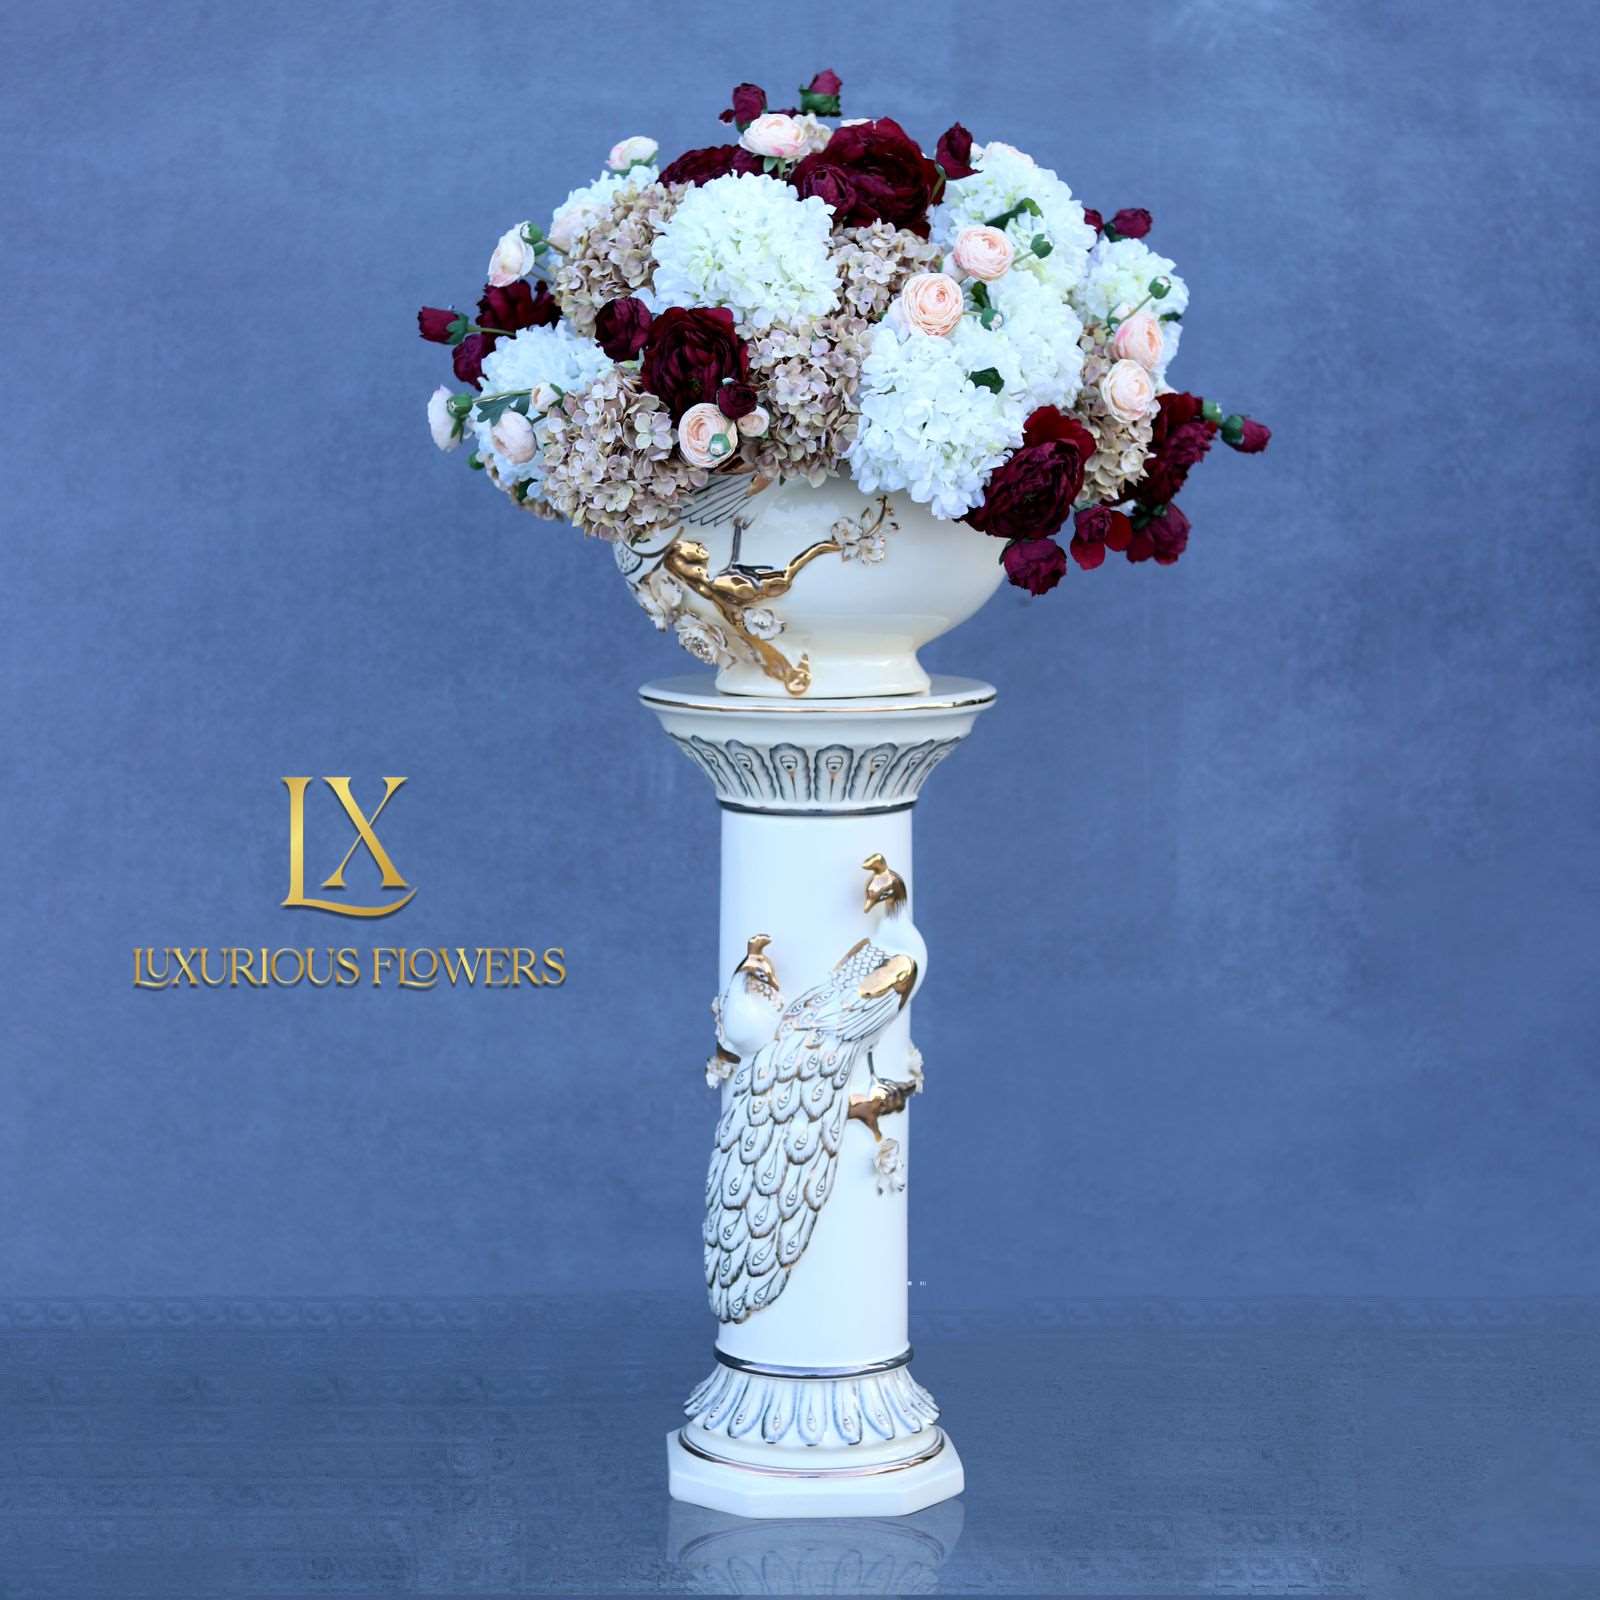 VIP Luxurious Palace Floral stand - Luxurious Flowers VIP